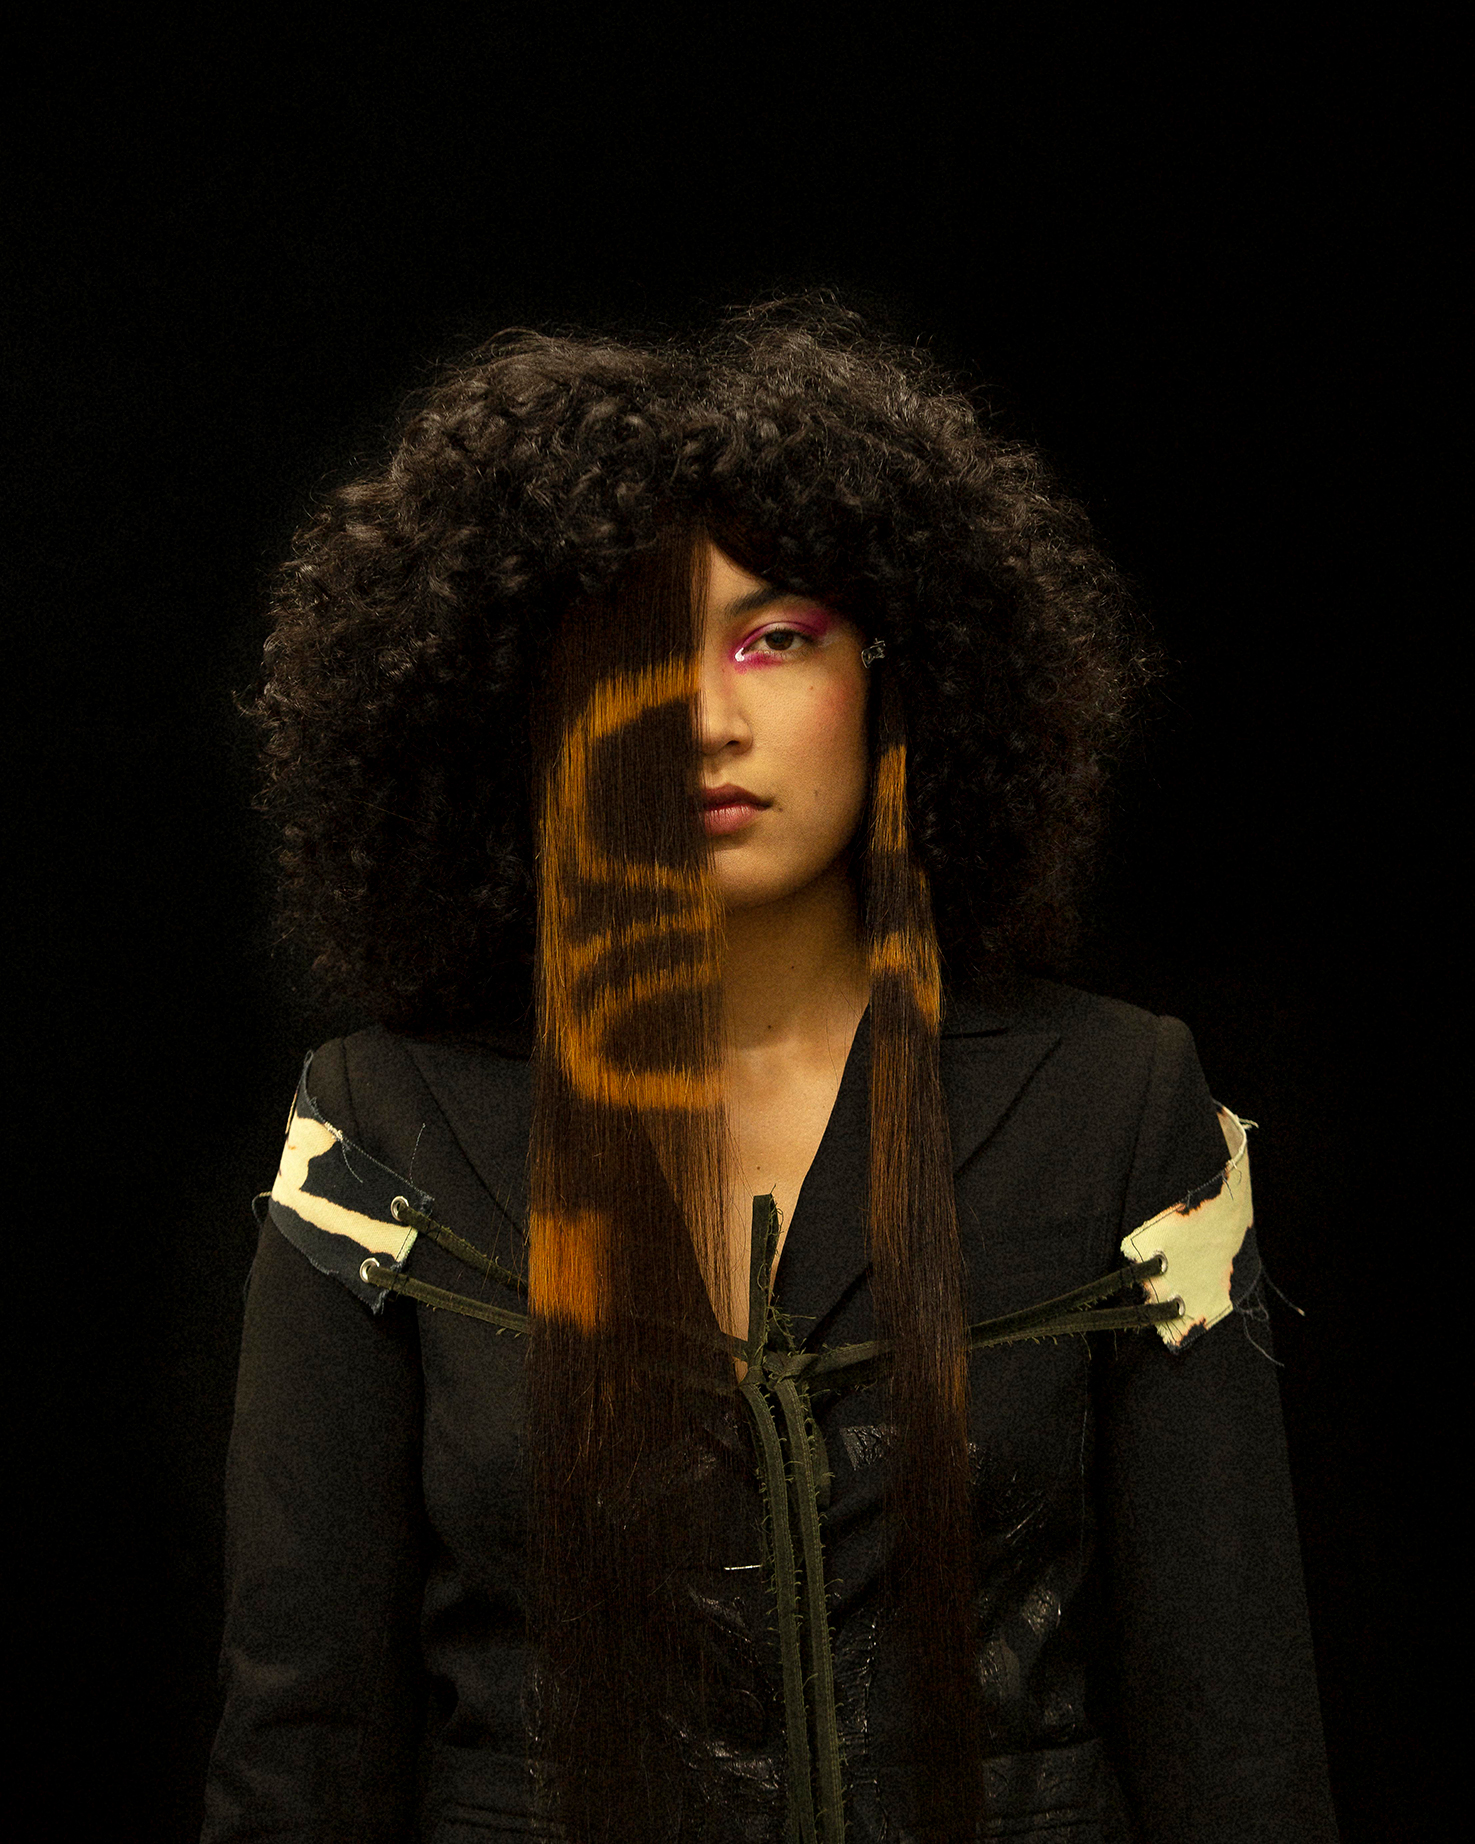 Portrait shot of a model facing the camera against a black background, half of her face is covered in long straight hair